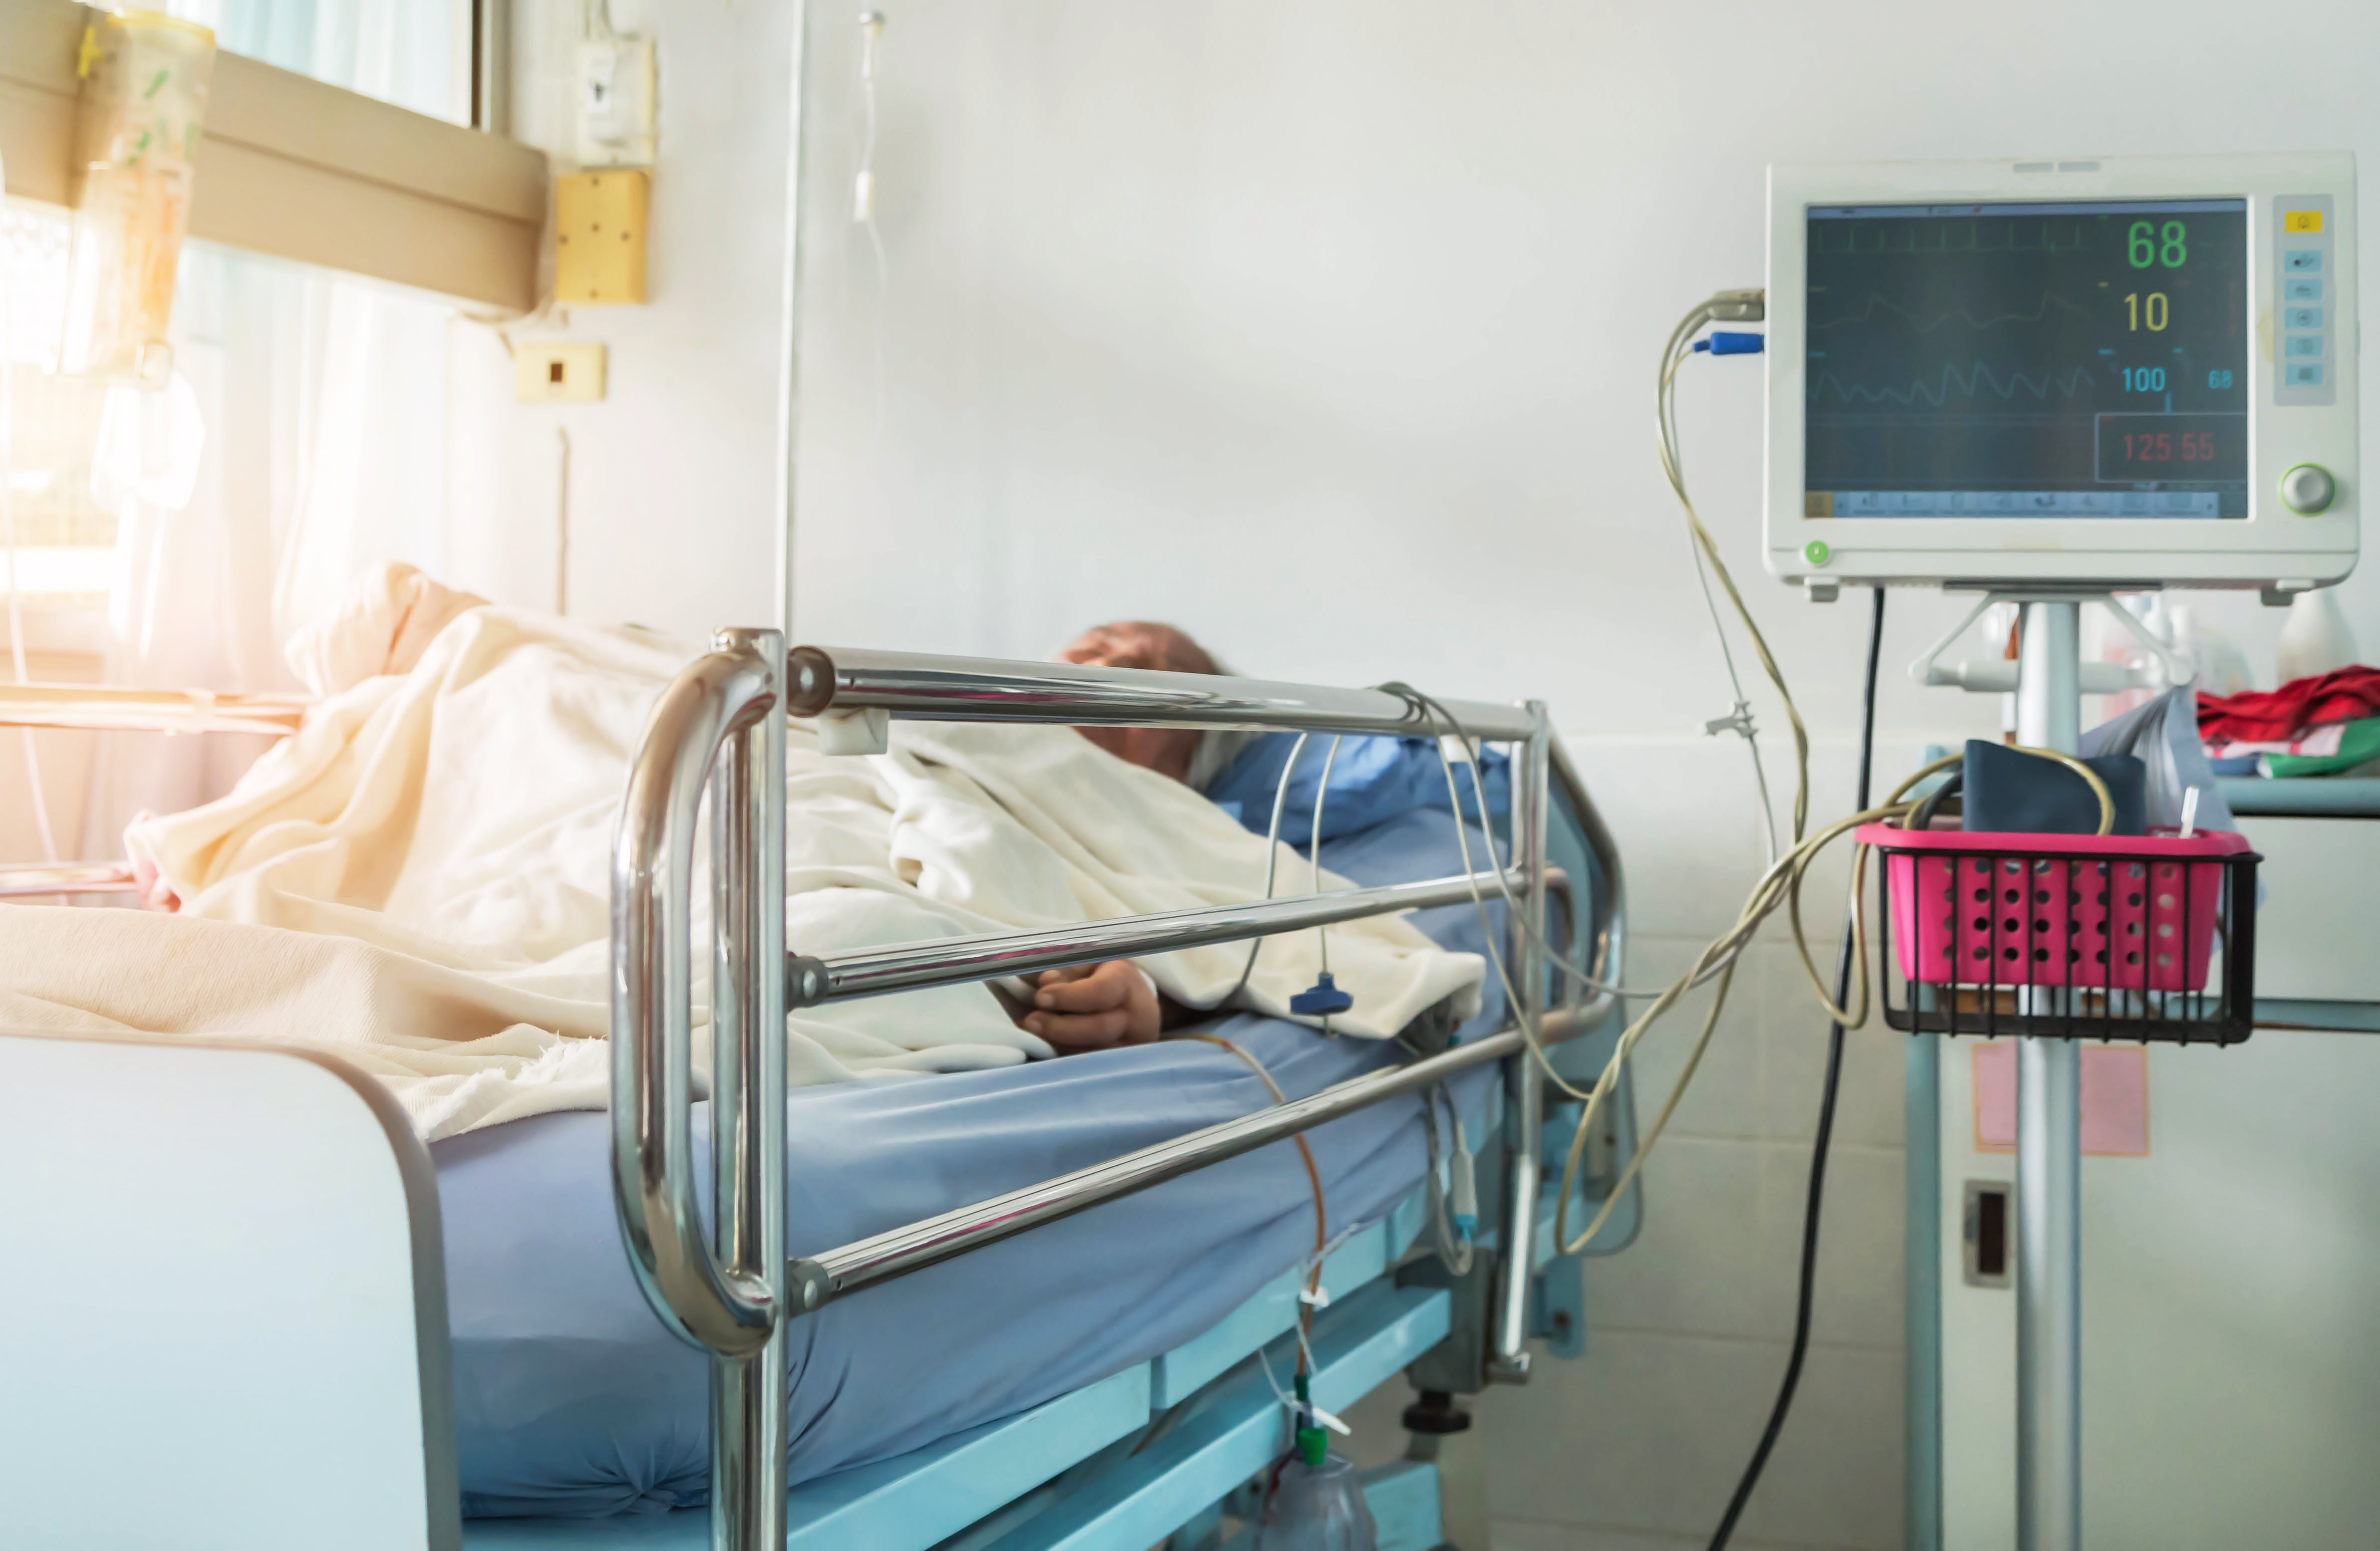 Fall Prevention in Hospitals